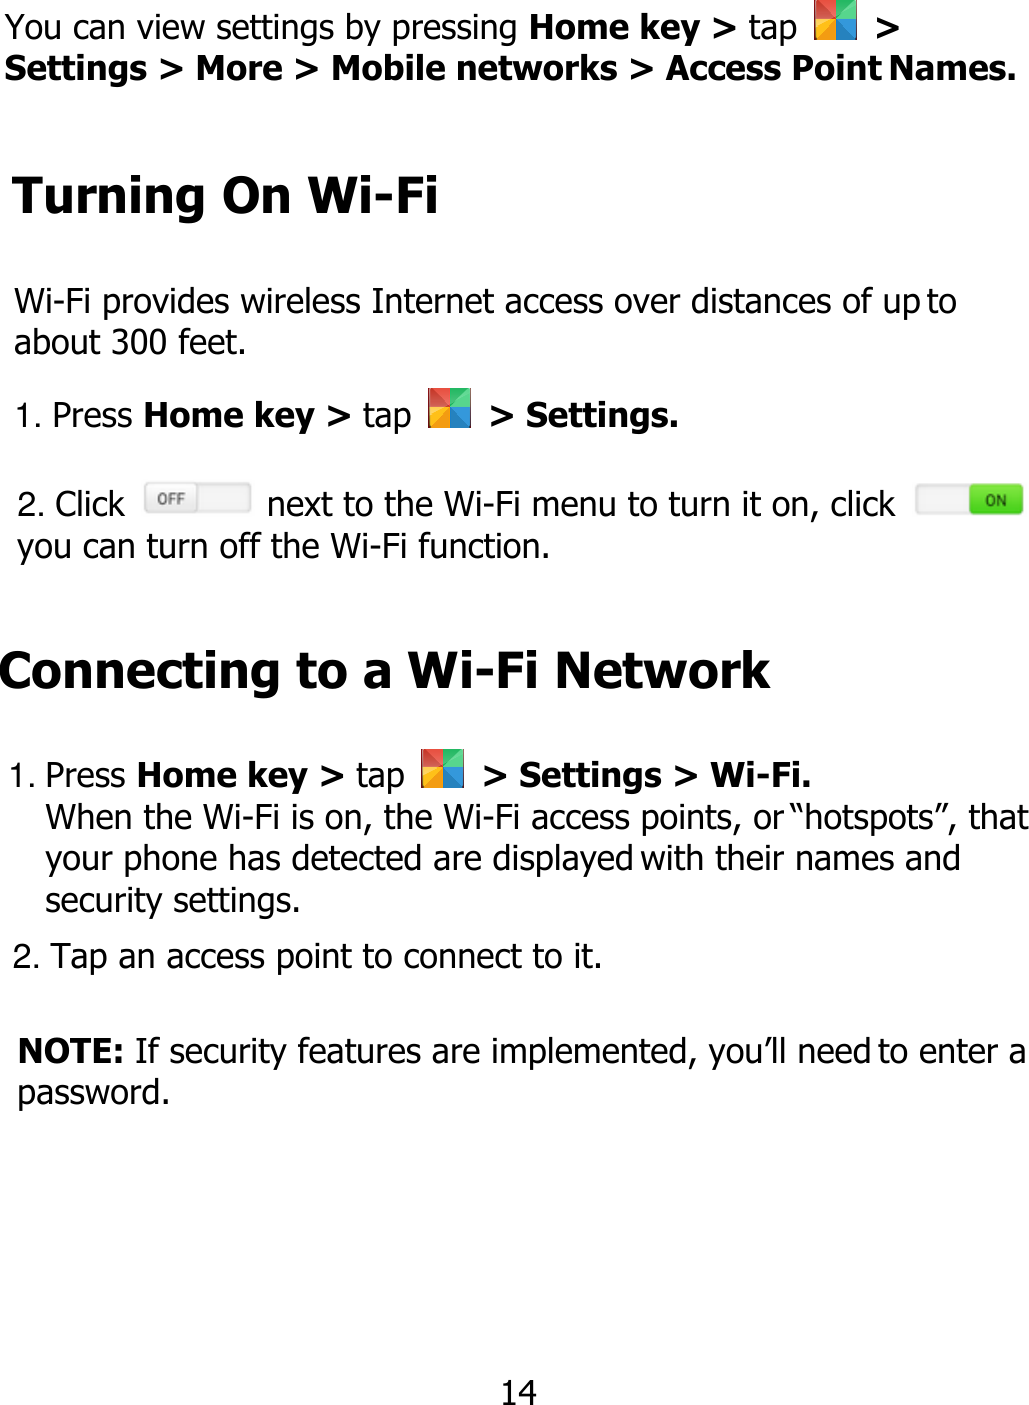 You can view settings by pressing Home key &gt; tap    &gt; Settings &gt; More &gt; Mobile networks &gt; Access Point Names. Turning On Wi-Fi Wi-Fi provides wireless Internet access over distances of up to about 300 feet. 1. Press Home key &gt; tap    &gt; Settings. 2. Click   next to the Wi-Fi menu to turn it on, click   you can turn off the Wi-Fi function. Connecting to a Wi-Fi Network 1. Press Home key &gt; tap    &gt; Settings &gt; Wi-Fi. When the Wi-Fi is on, the Wi-Fi access points, or “hotspots”, that your phone has detected are displayed with their names and security settings. 2. Tap an access point to connect to it. NOTE: If security features are implemented, you’ll need to enter a password. 14 